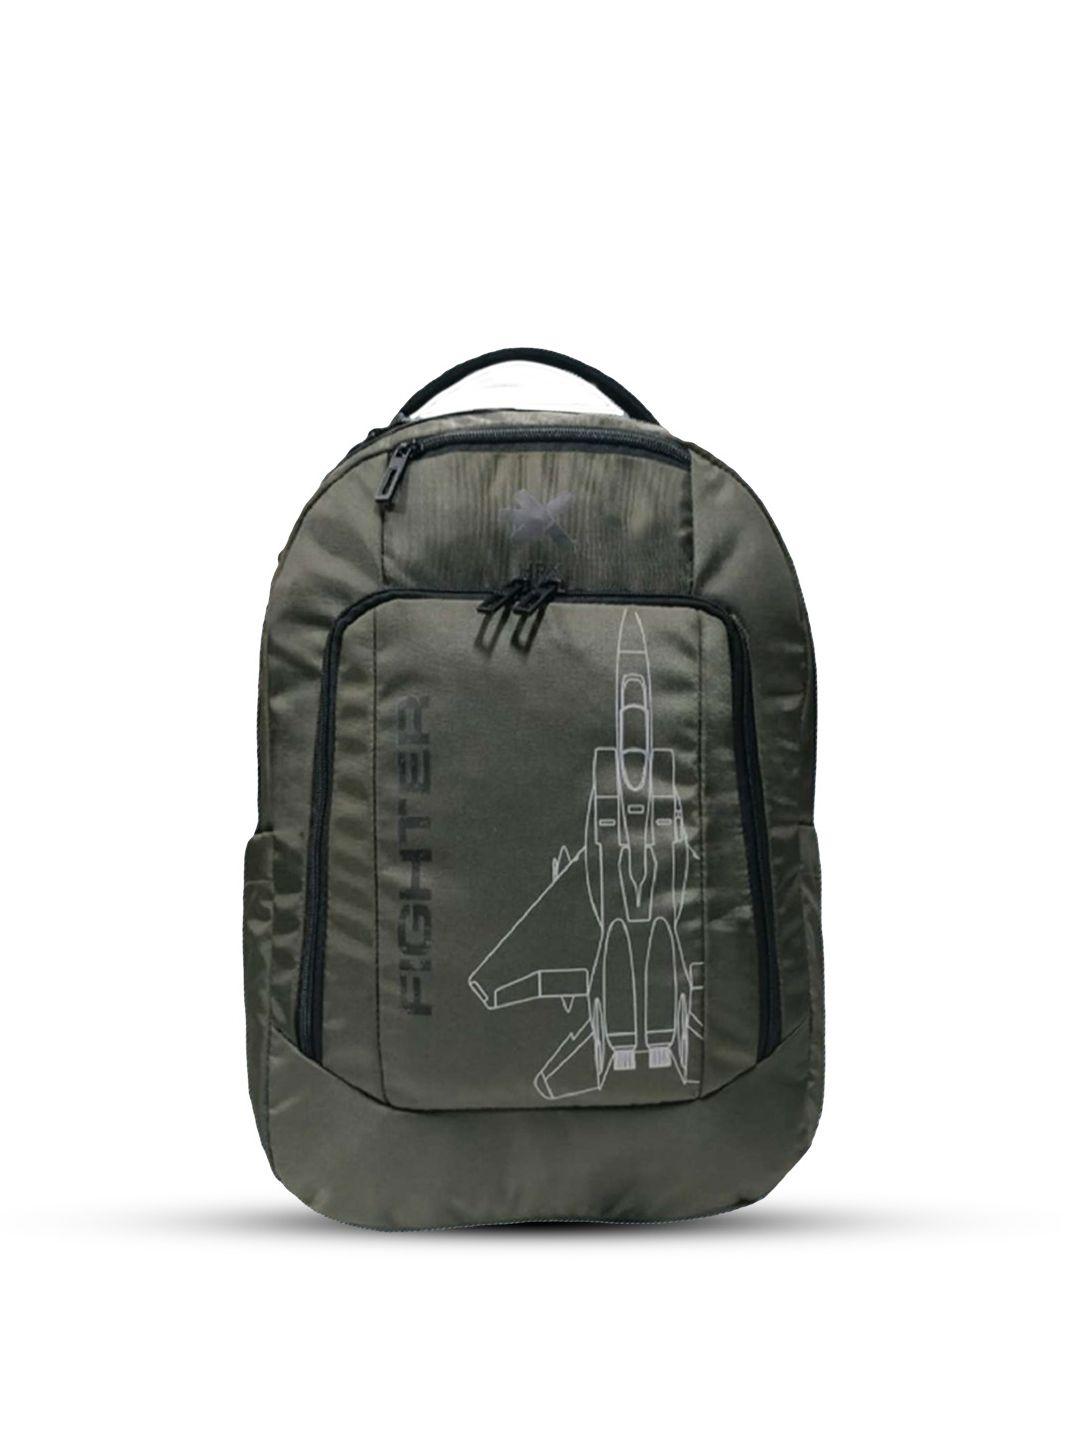 hrx by hrithik roshan unisex olive green brand logo backpack- laptop up to 16 inch